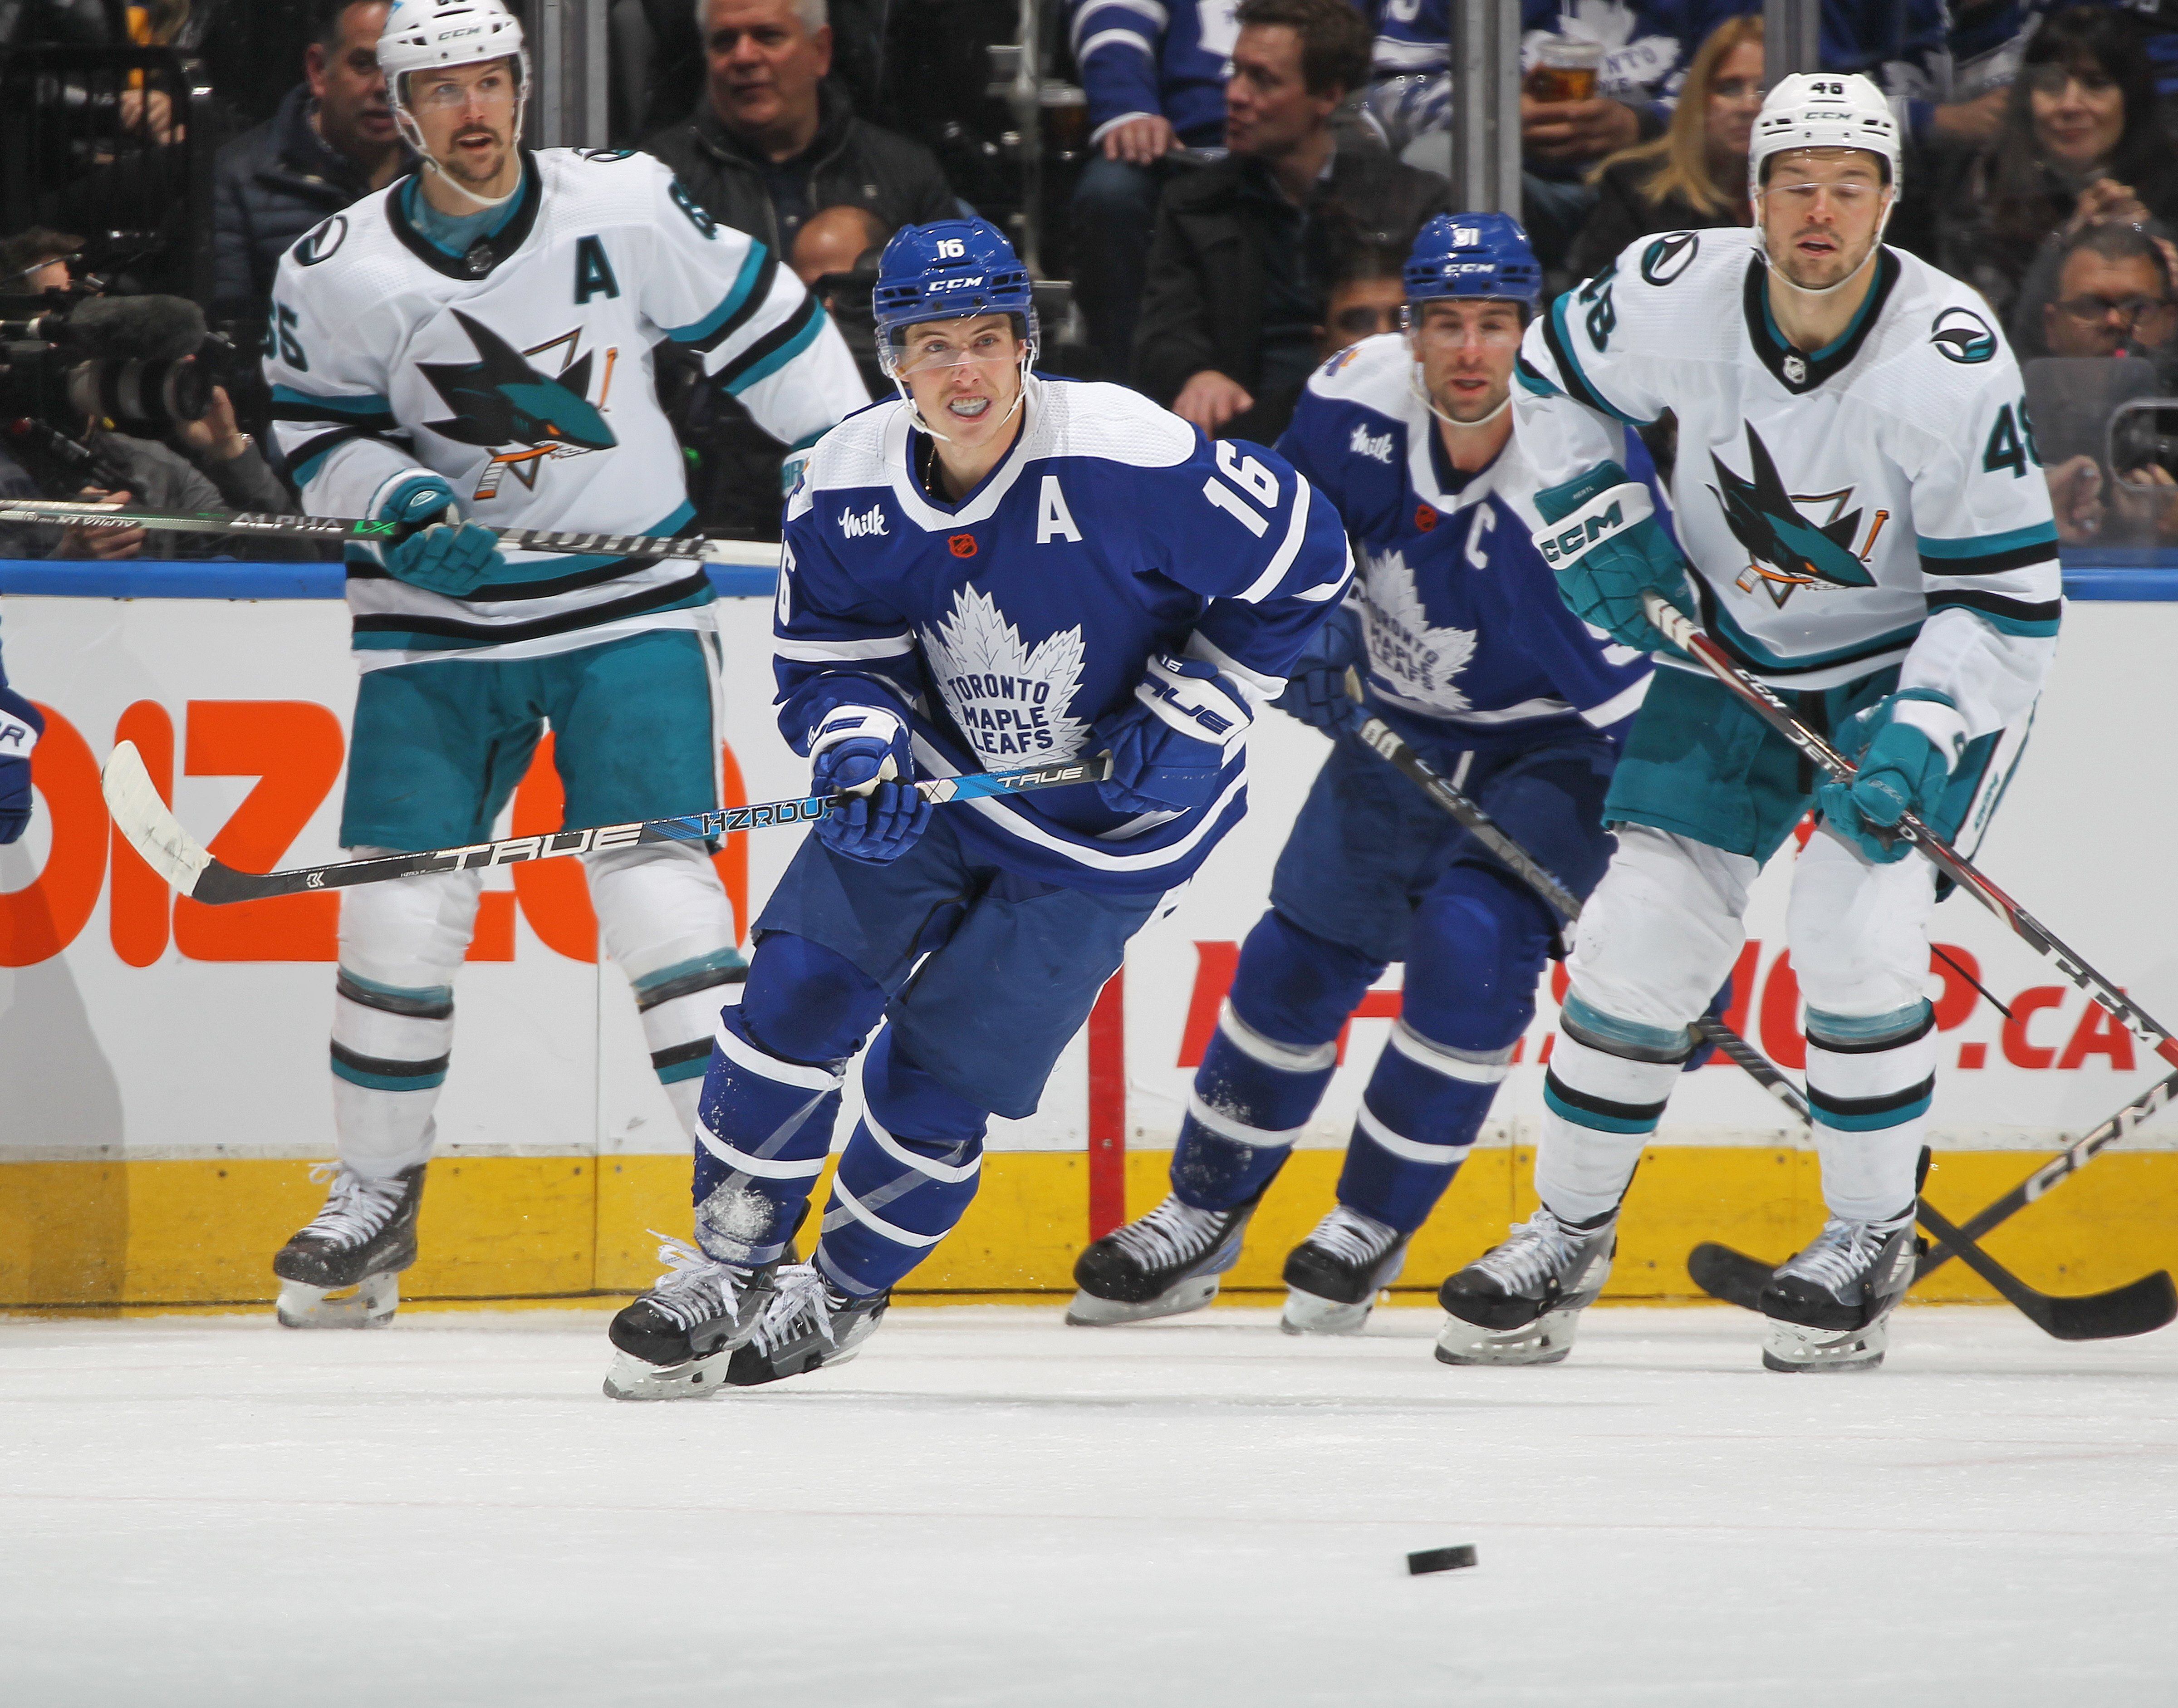 Leafs down Sharks as Marner ties franchise record with 18-game